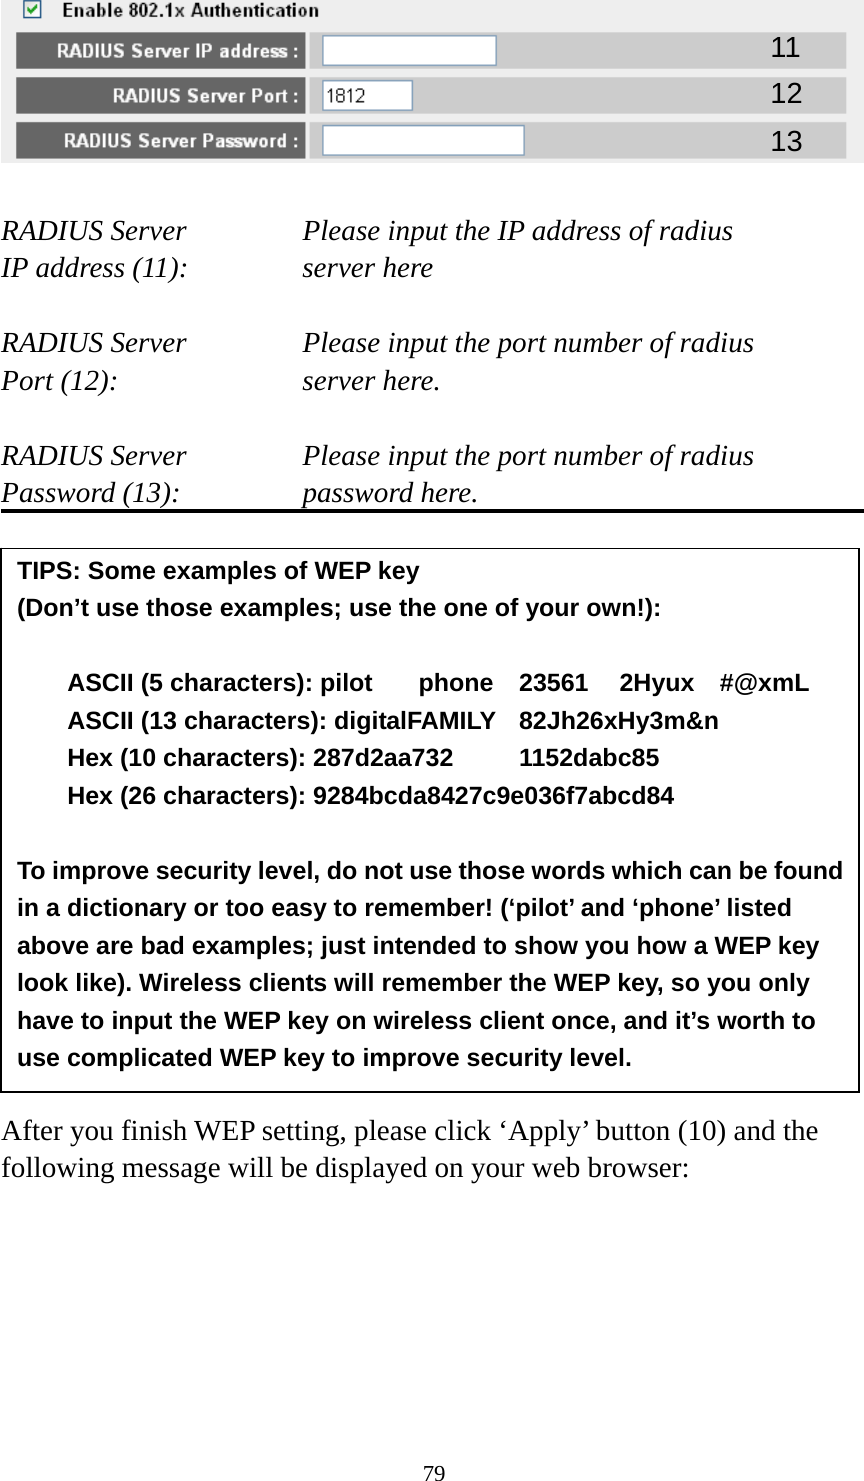 79   RADIUS Server      Please input the IP address of radius   IP address (11):      server here  RADIUS Server      Please input the port number of radius Port (12):    server here.  RADIUS Server      Please input the port number of radius Password (13):      password here.                 After you finish WEP setting, please click ‘Apply’ button (10) and the following message will be displayed on your web browser:  11 12 13 TIPS: Some examples of WEP key   (Don’t use those examples; use the one of your own!):  ASCII (5 characters): pilot    phone    23561    2Hyux    #@xmL ASCII (13 characters): digitalFAMILY  82Jh26xHy3m&amp;n Hex (10 characters): 287d2aa732   1152dabc85 Hex (26 characters): 9284bcda8427c9e036f7abcd84  To improve security level, do not use those words which can be found in a dictionary or too easy to remember! (‘pilot’ and ‘phone’ listed above are bad examples; just intended to show you how a WEP key look like). Wireless clients will remember the WEP key, so you only have to input the WEP key on wireless client once, and it’s worth to use complicated WEP key to improve security level. 